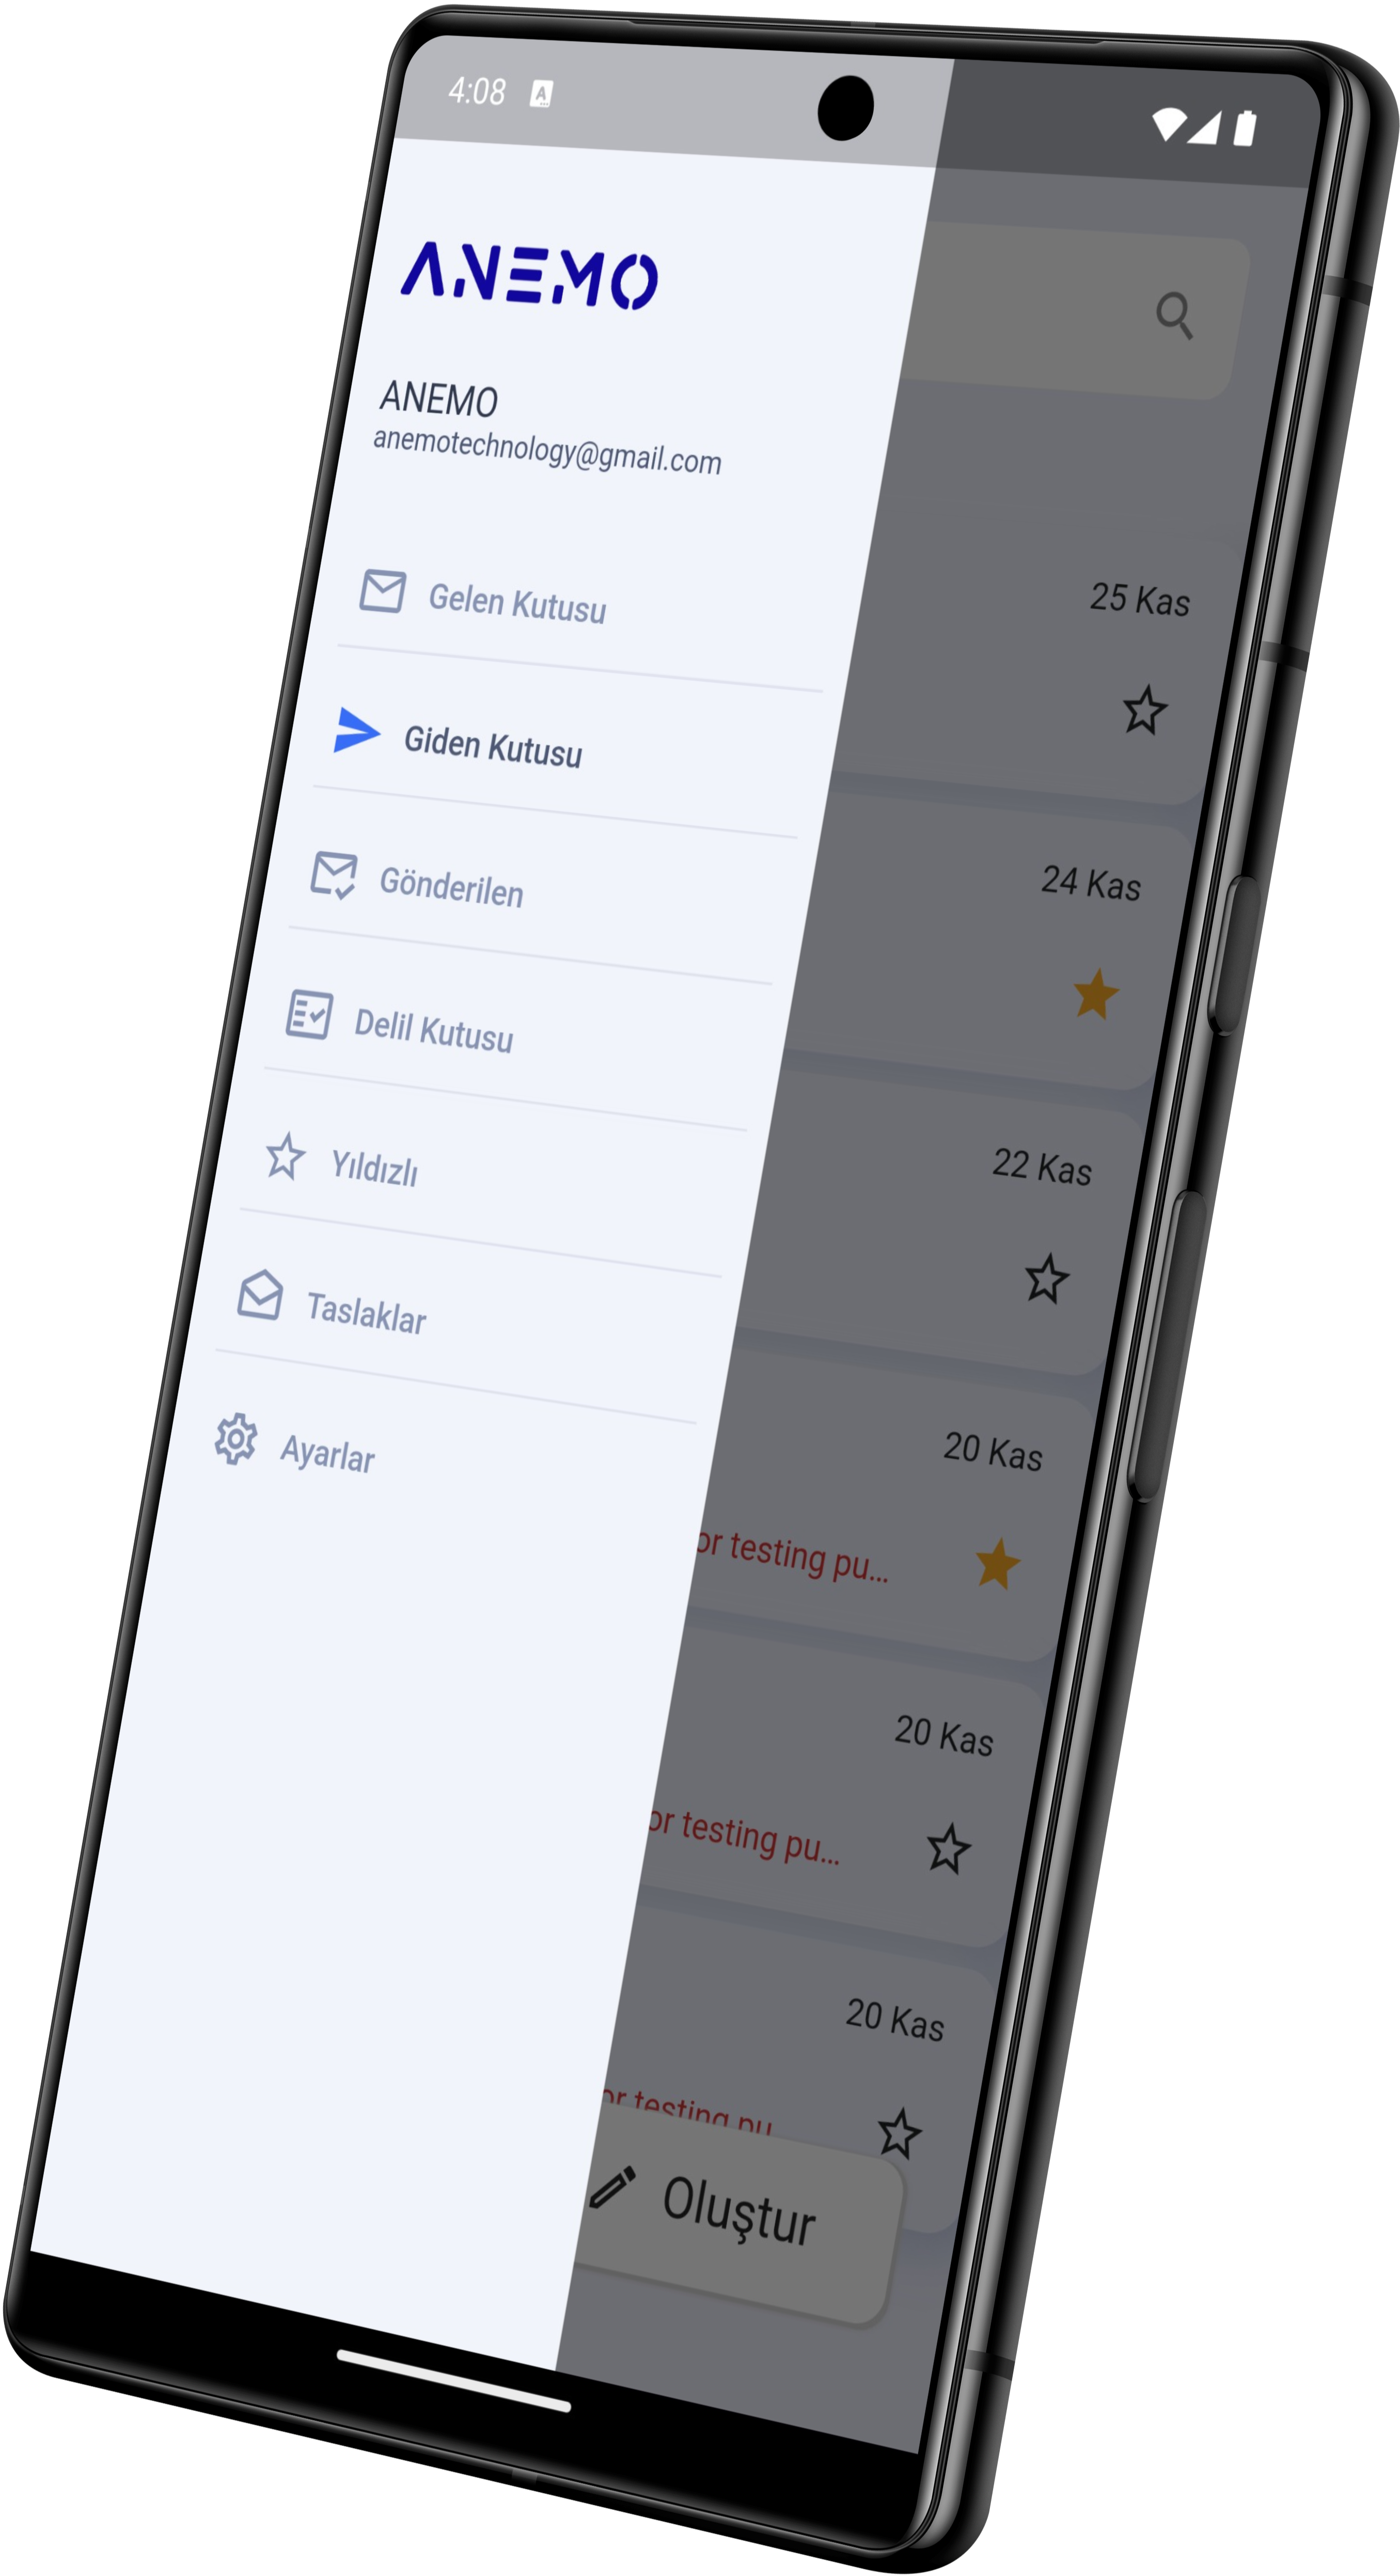 Mailing app is developed by Anemo